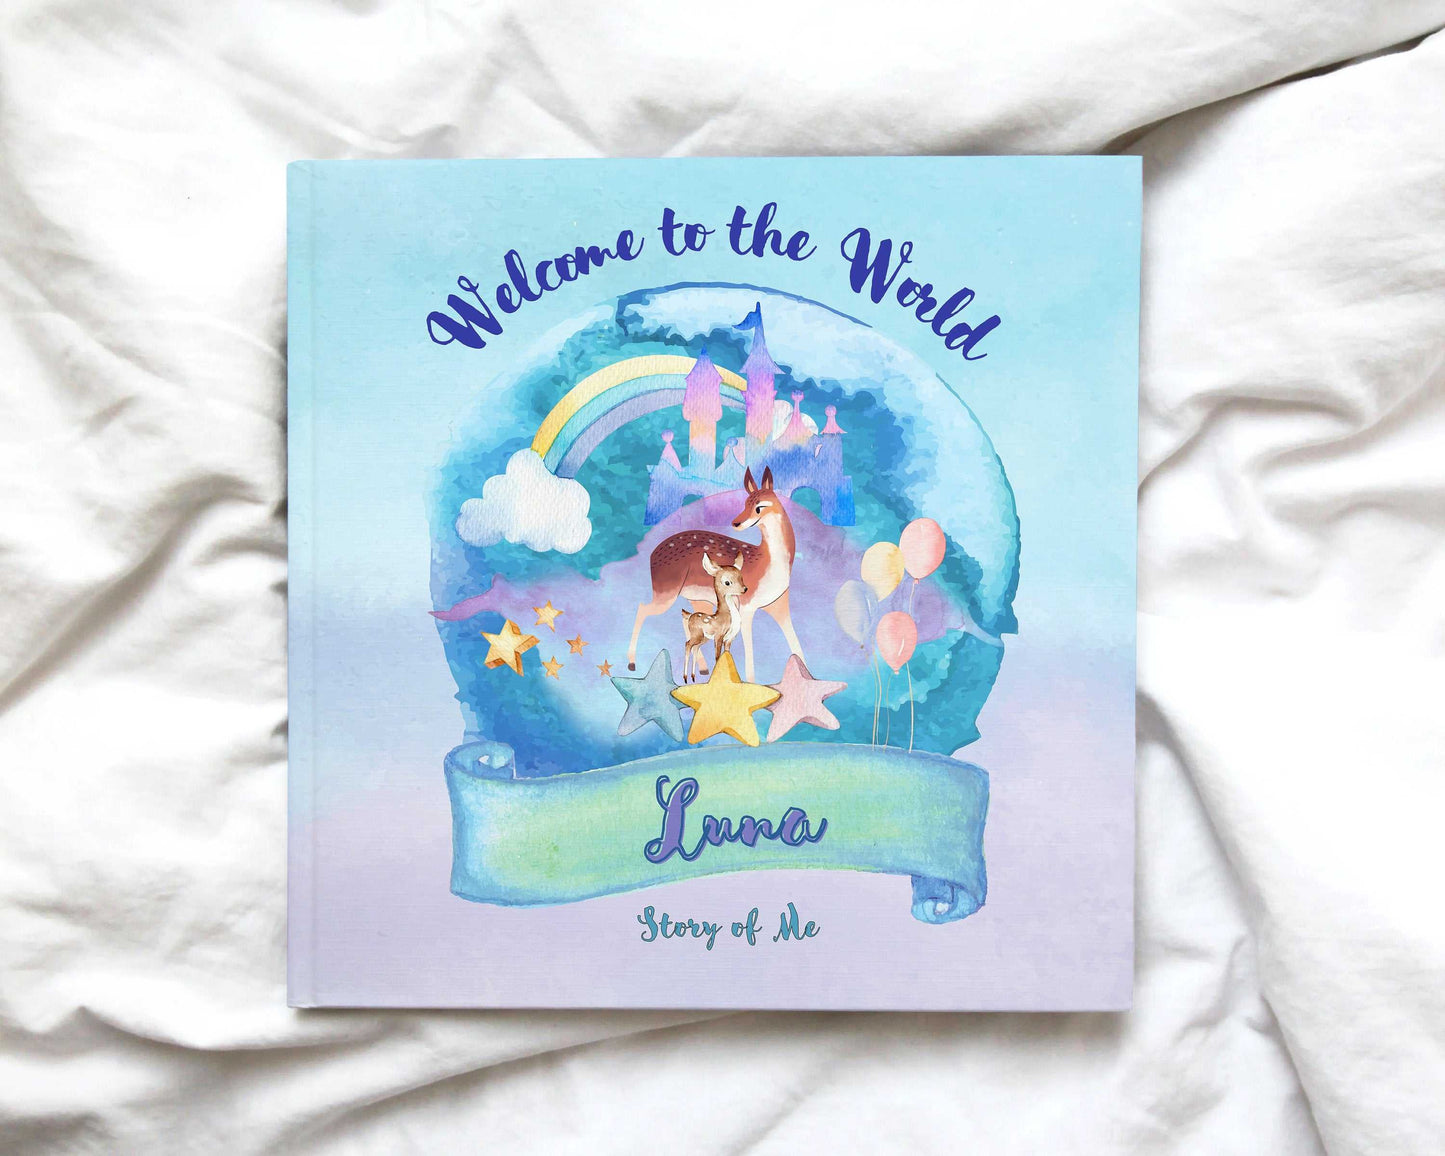 personalized baby book